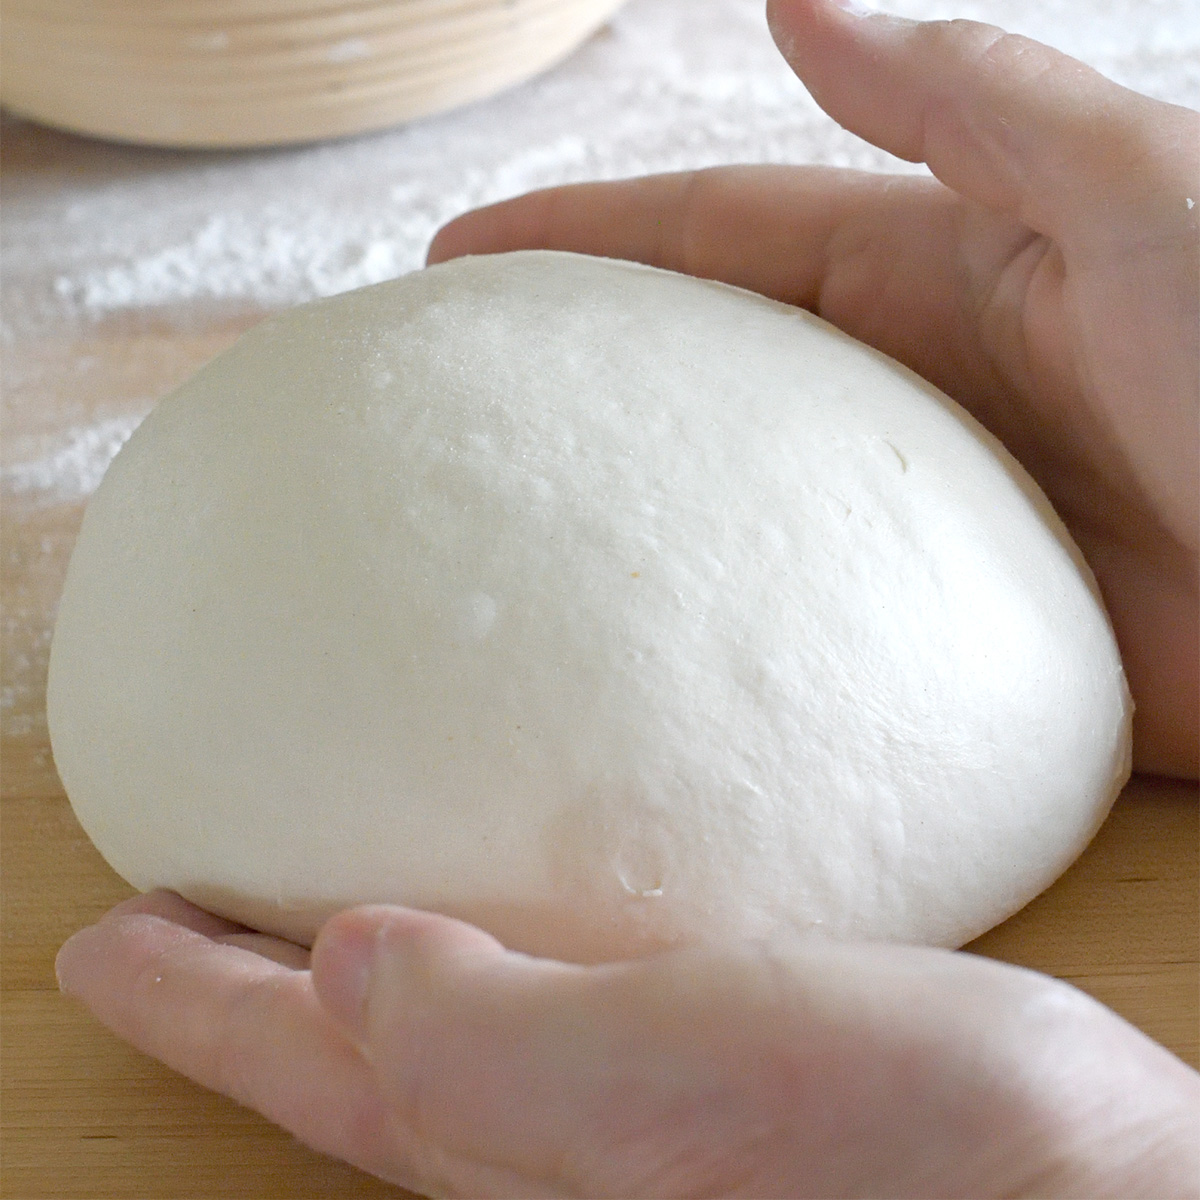 hands forming a ball of bread dough.